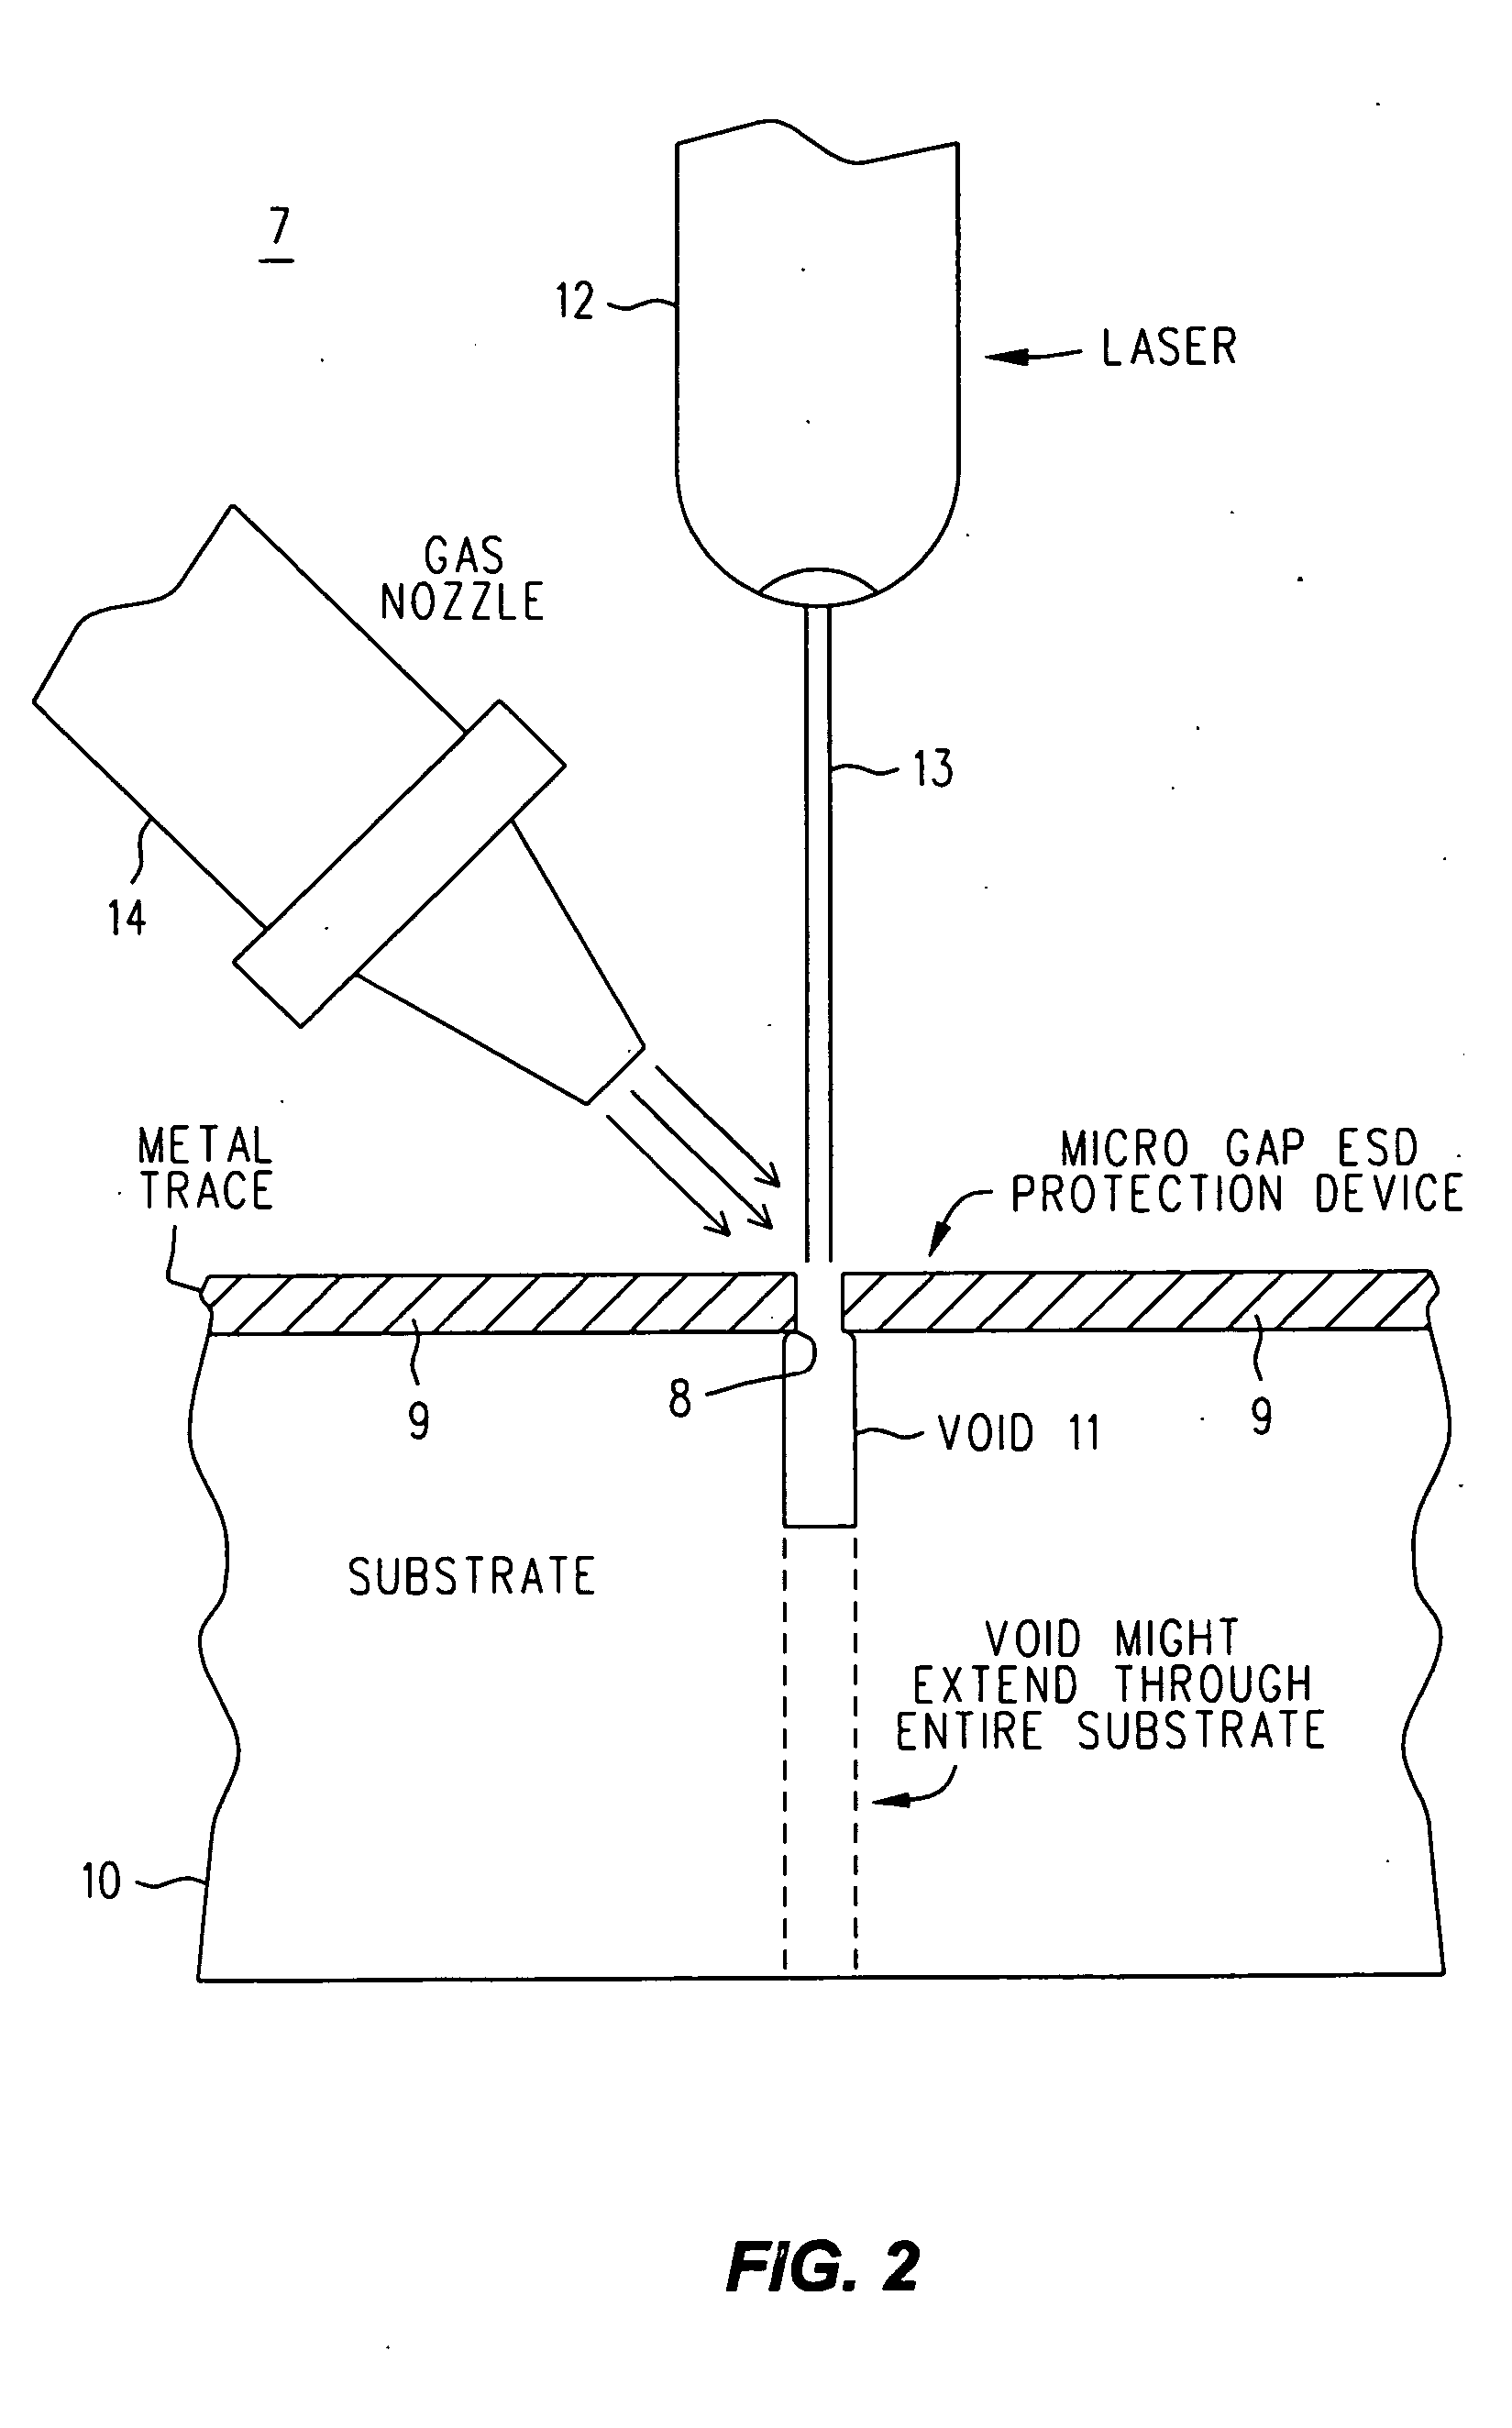 Micro gap method and ESD protection device